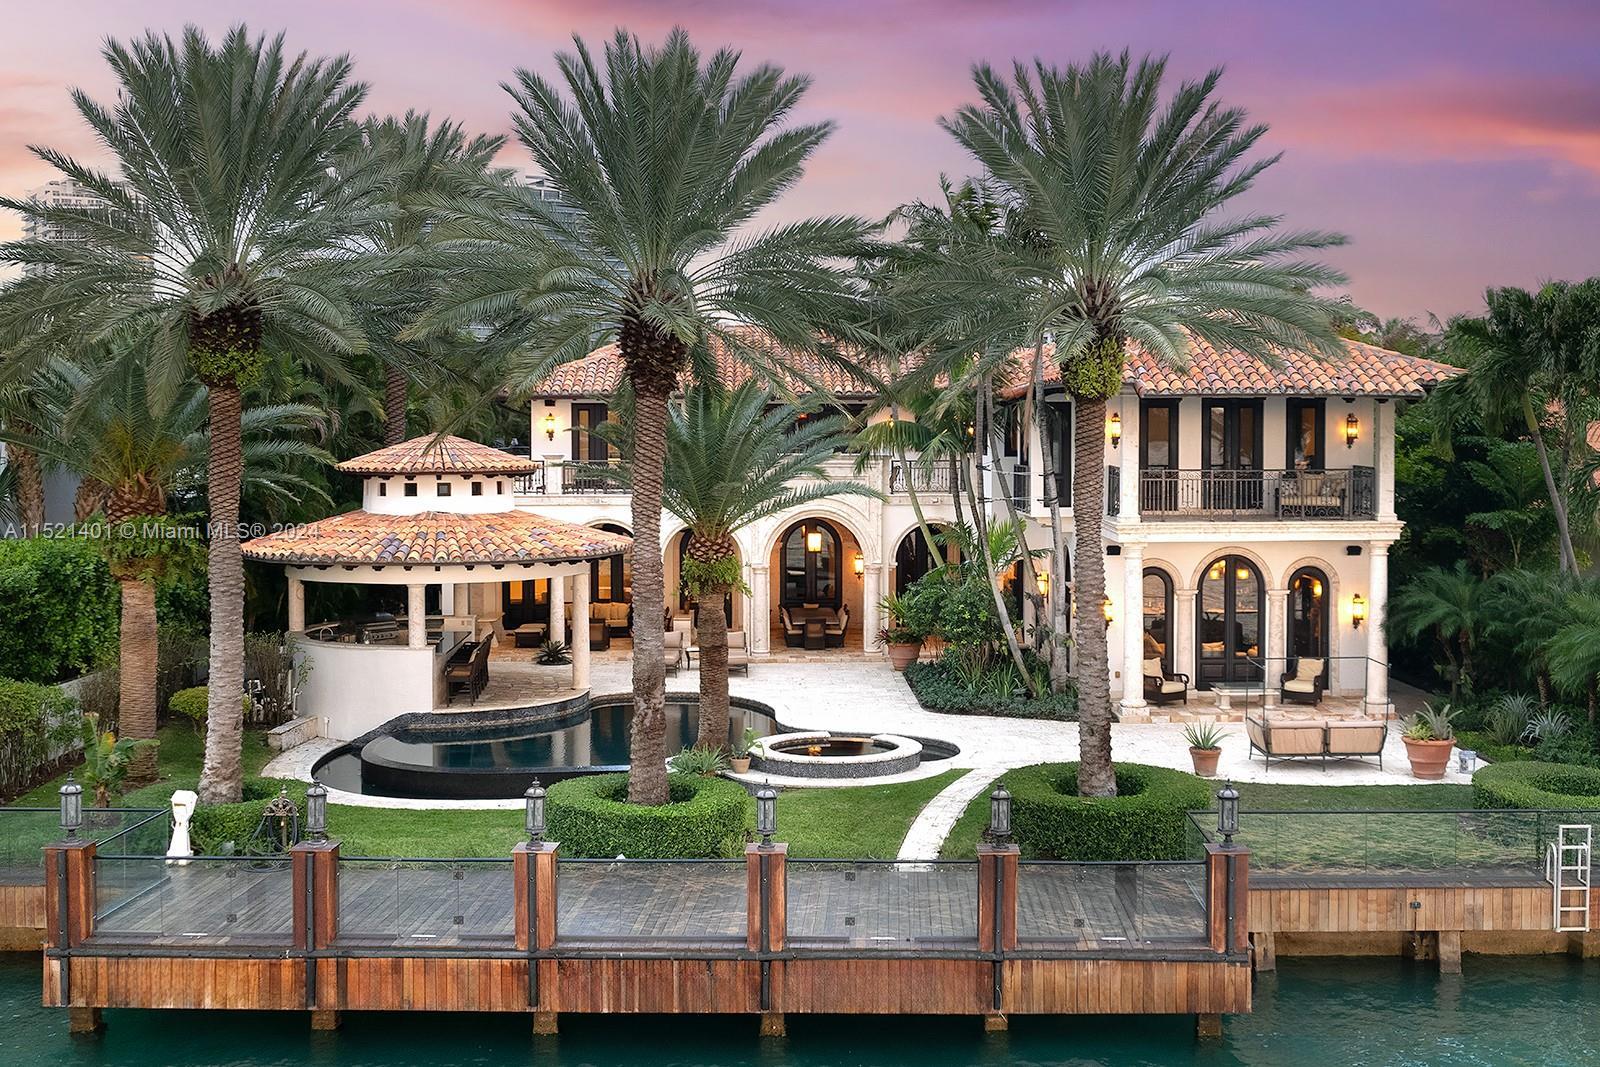 Welcome to this timeless Mediterranean waterfront estate in the exclusive guard-gated neighborhood o